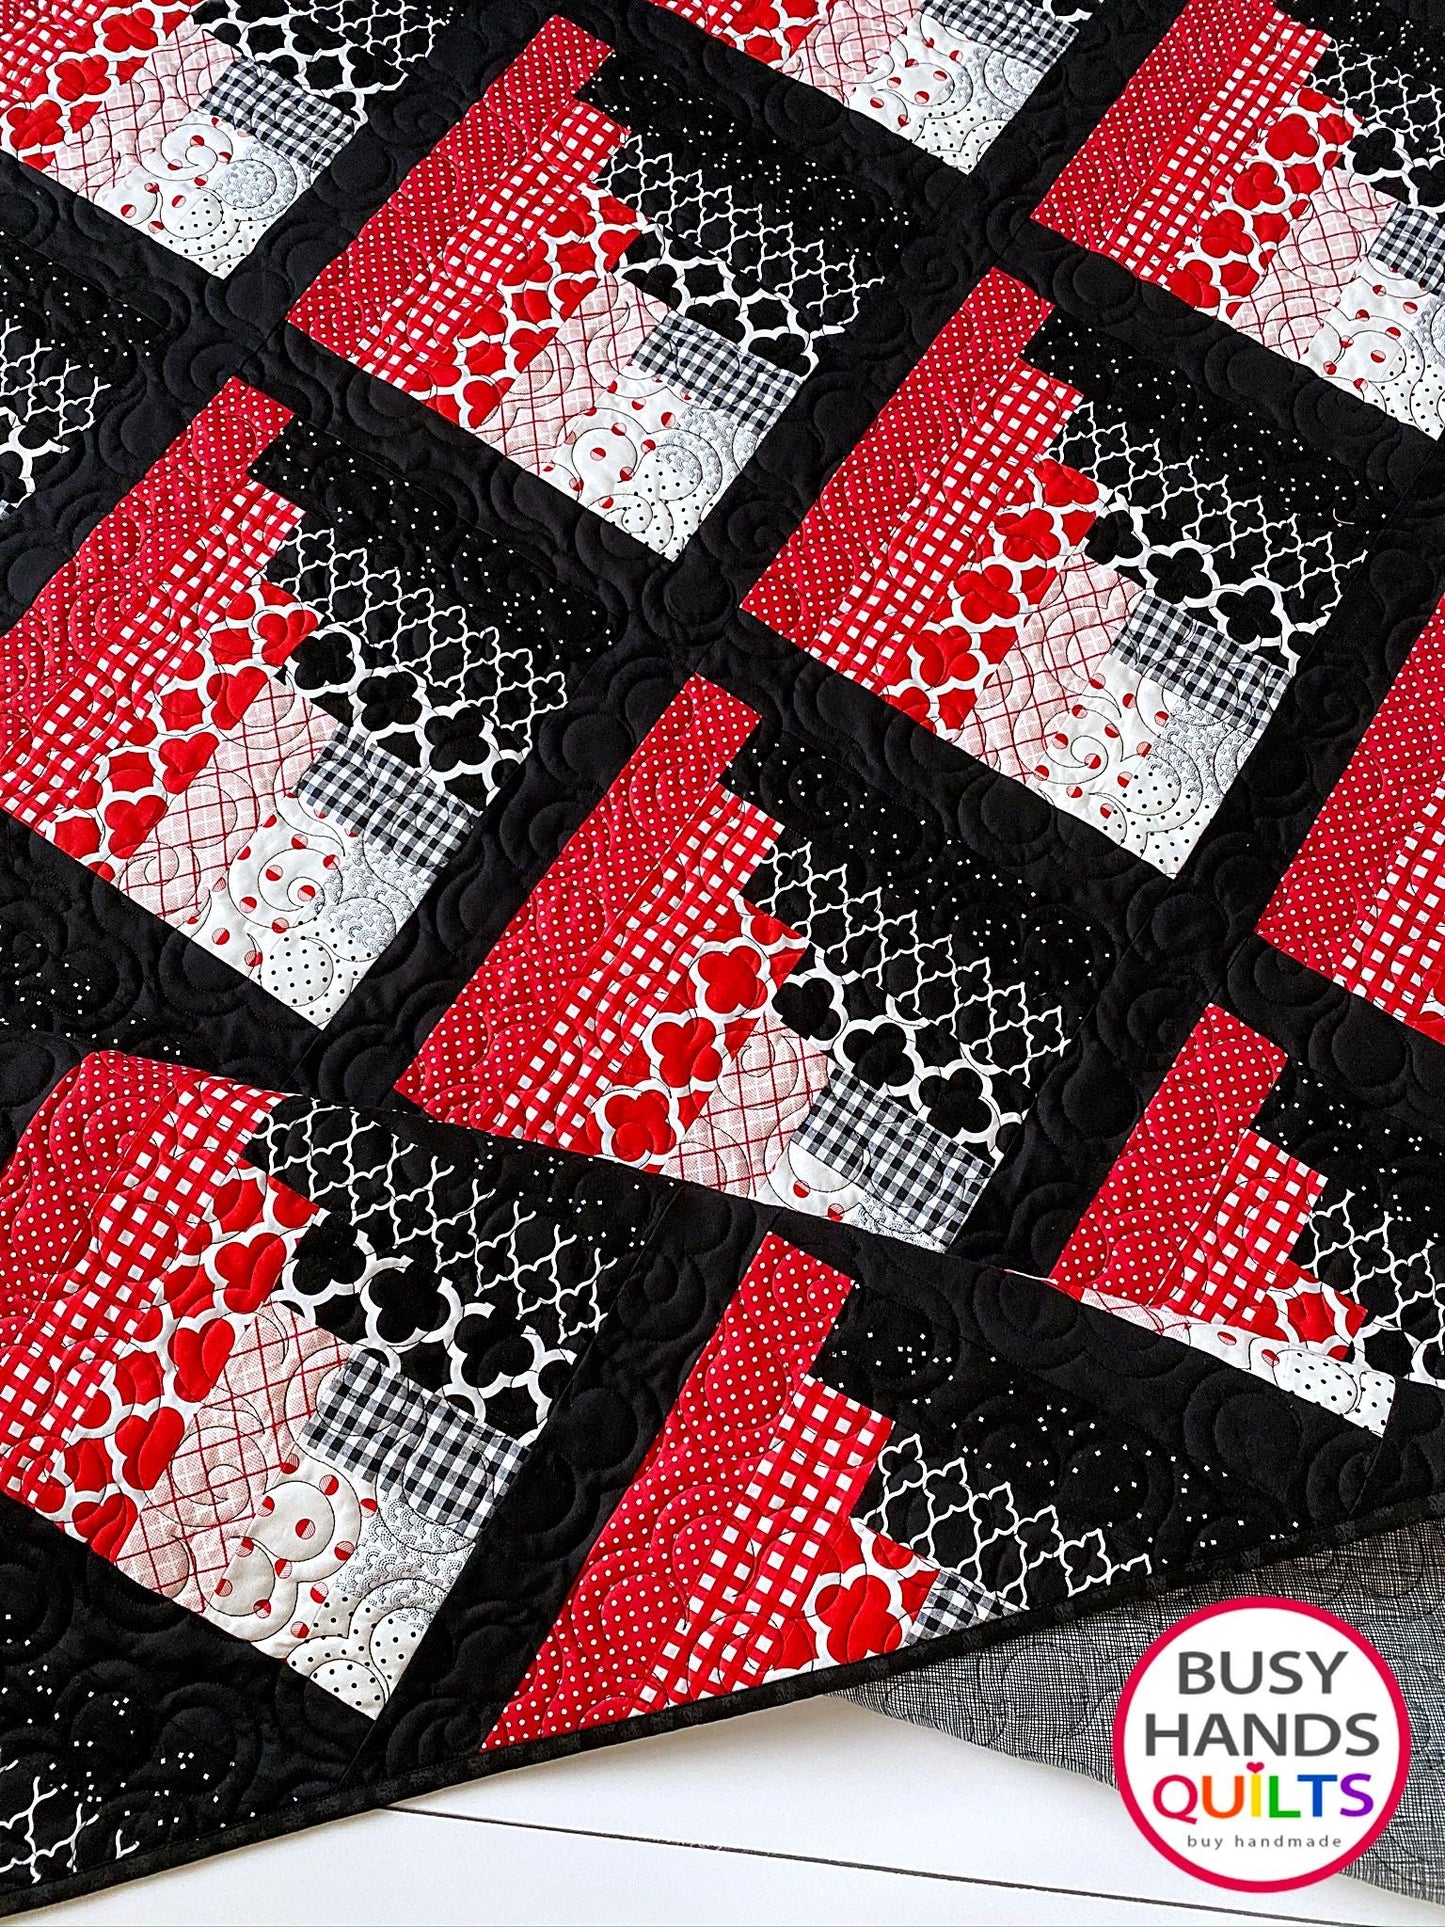 Custom Handmade Waterfall Throw Quilt in Black and Red - Ready to Ship Busy Hands Quilts $415